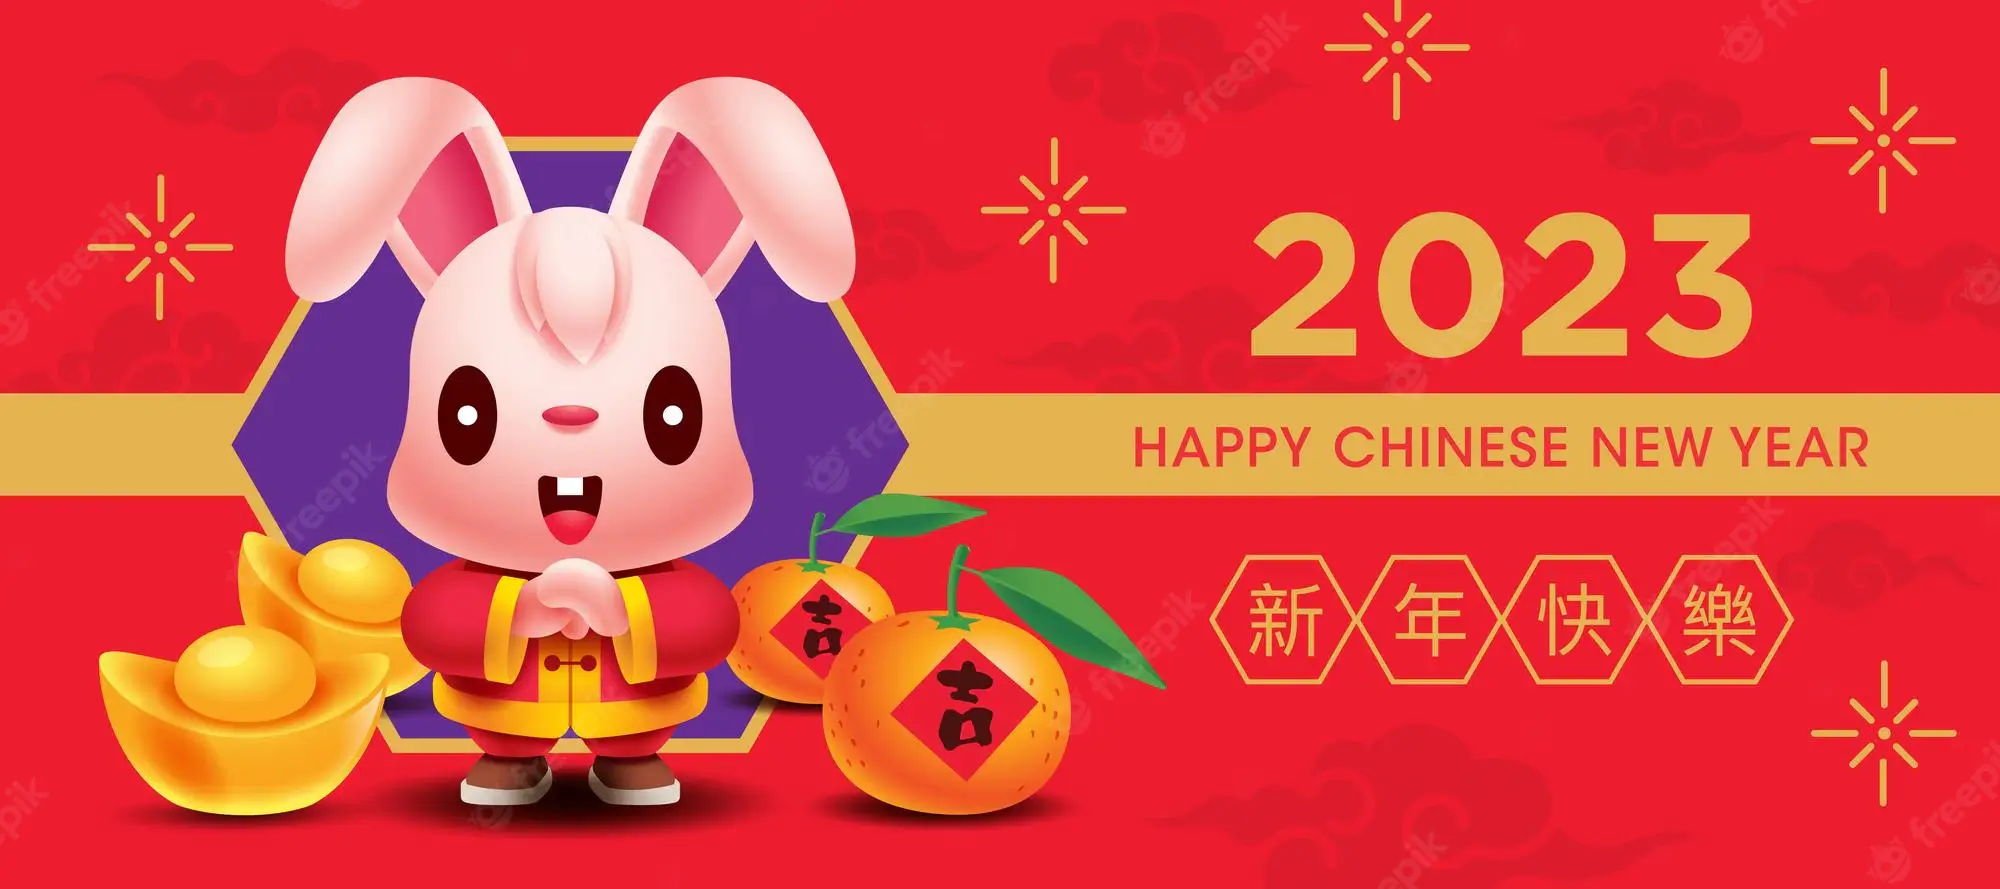 Chinese New Year 2023 Wishes Greetings Quotes